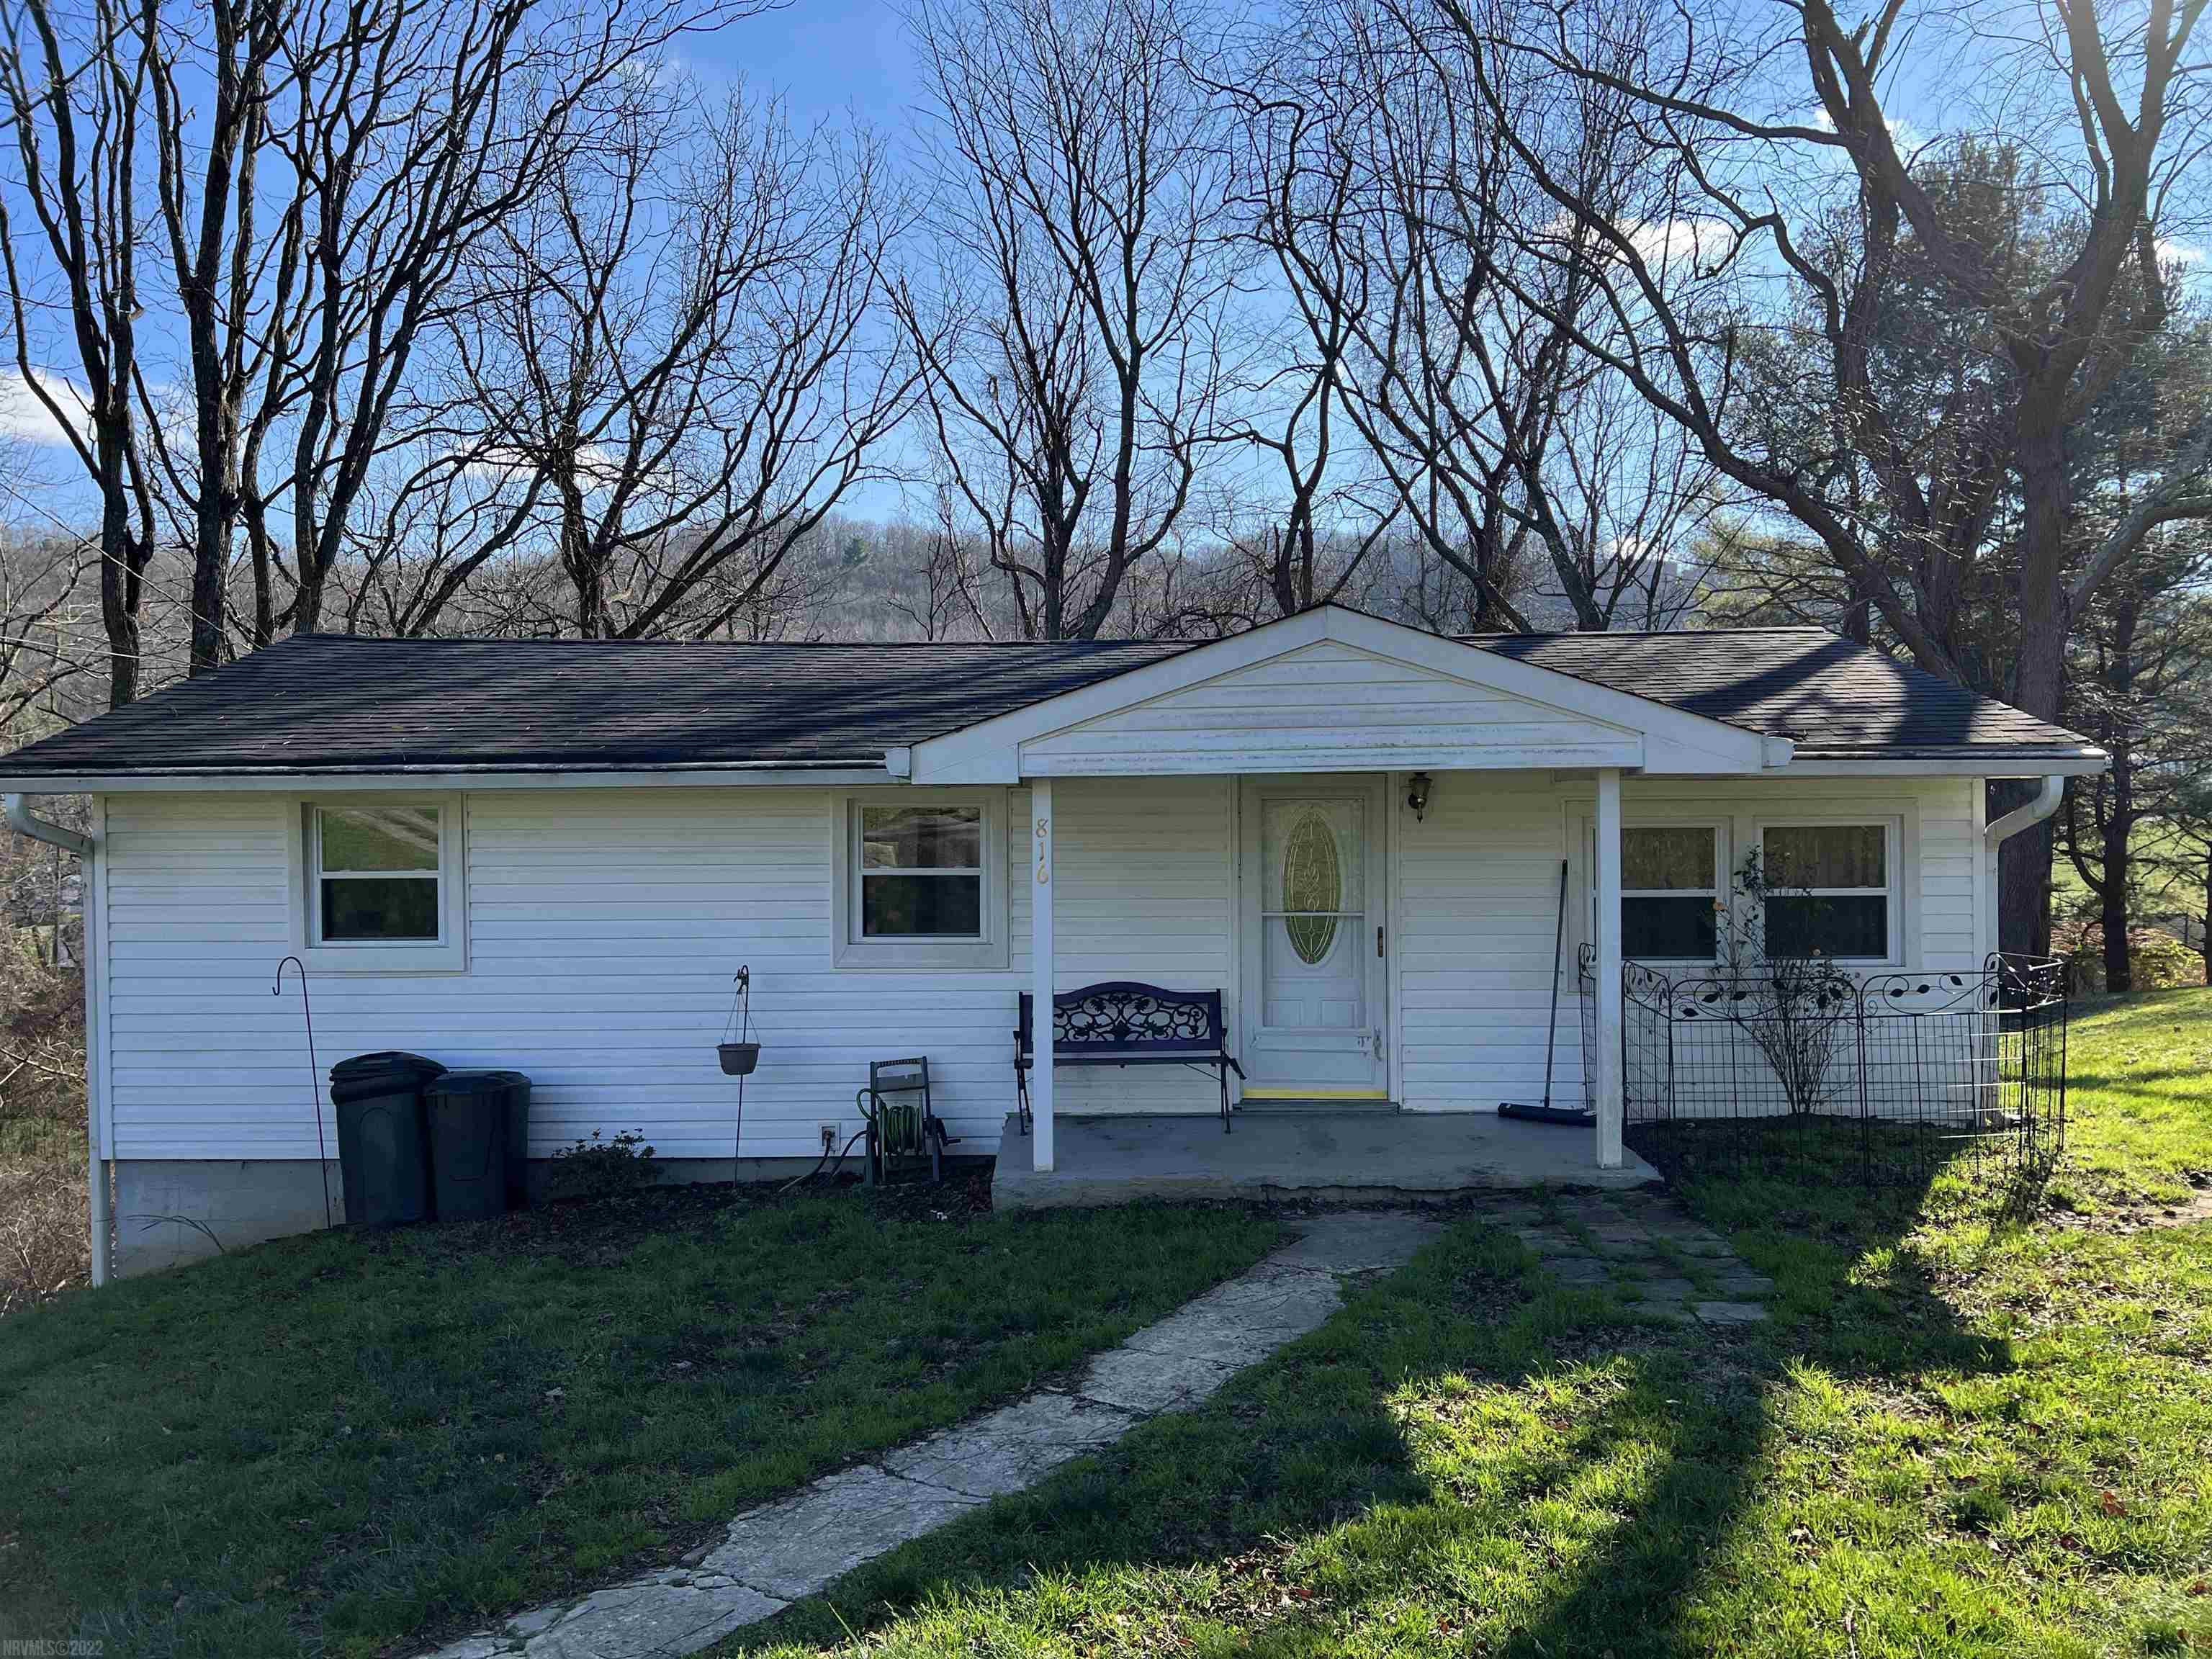 This charming 3 bed 1 bath sits in a quiet neighborhood, close to town, with easy access to shopping and dining. Covered front porch, spacious back deck, with plenty of storage in the basement.  Major remodeling in 2011. Needs some TLC, but great starter home or investment property.  Call today!